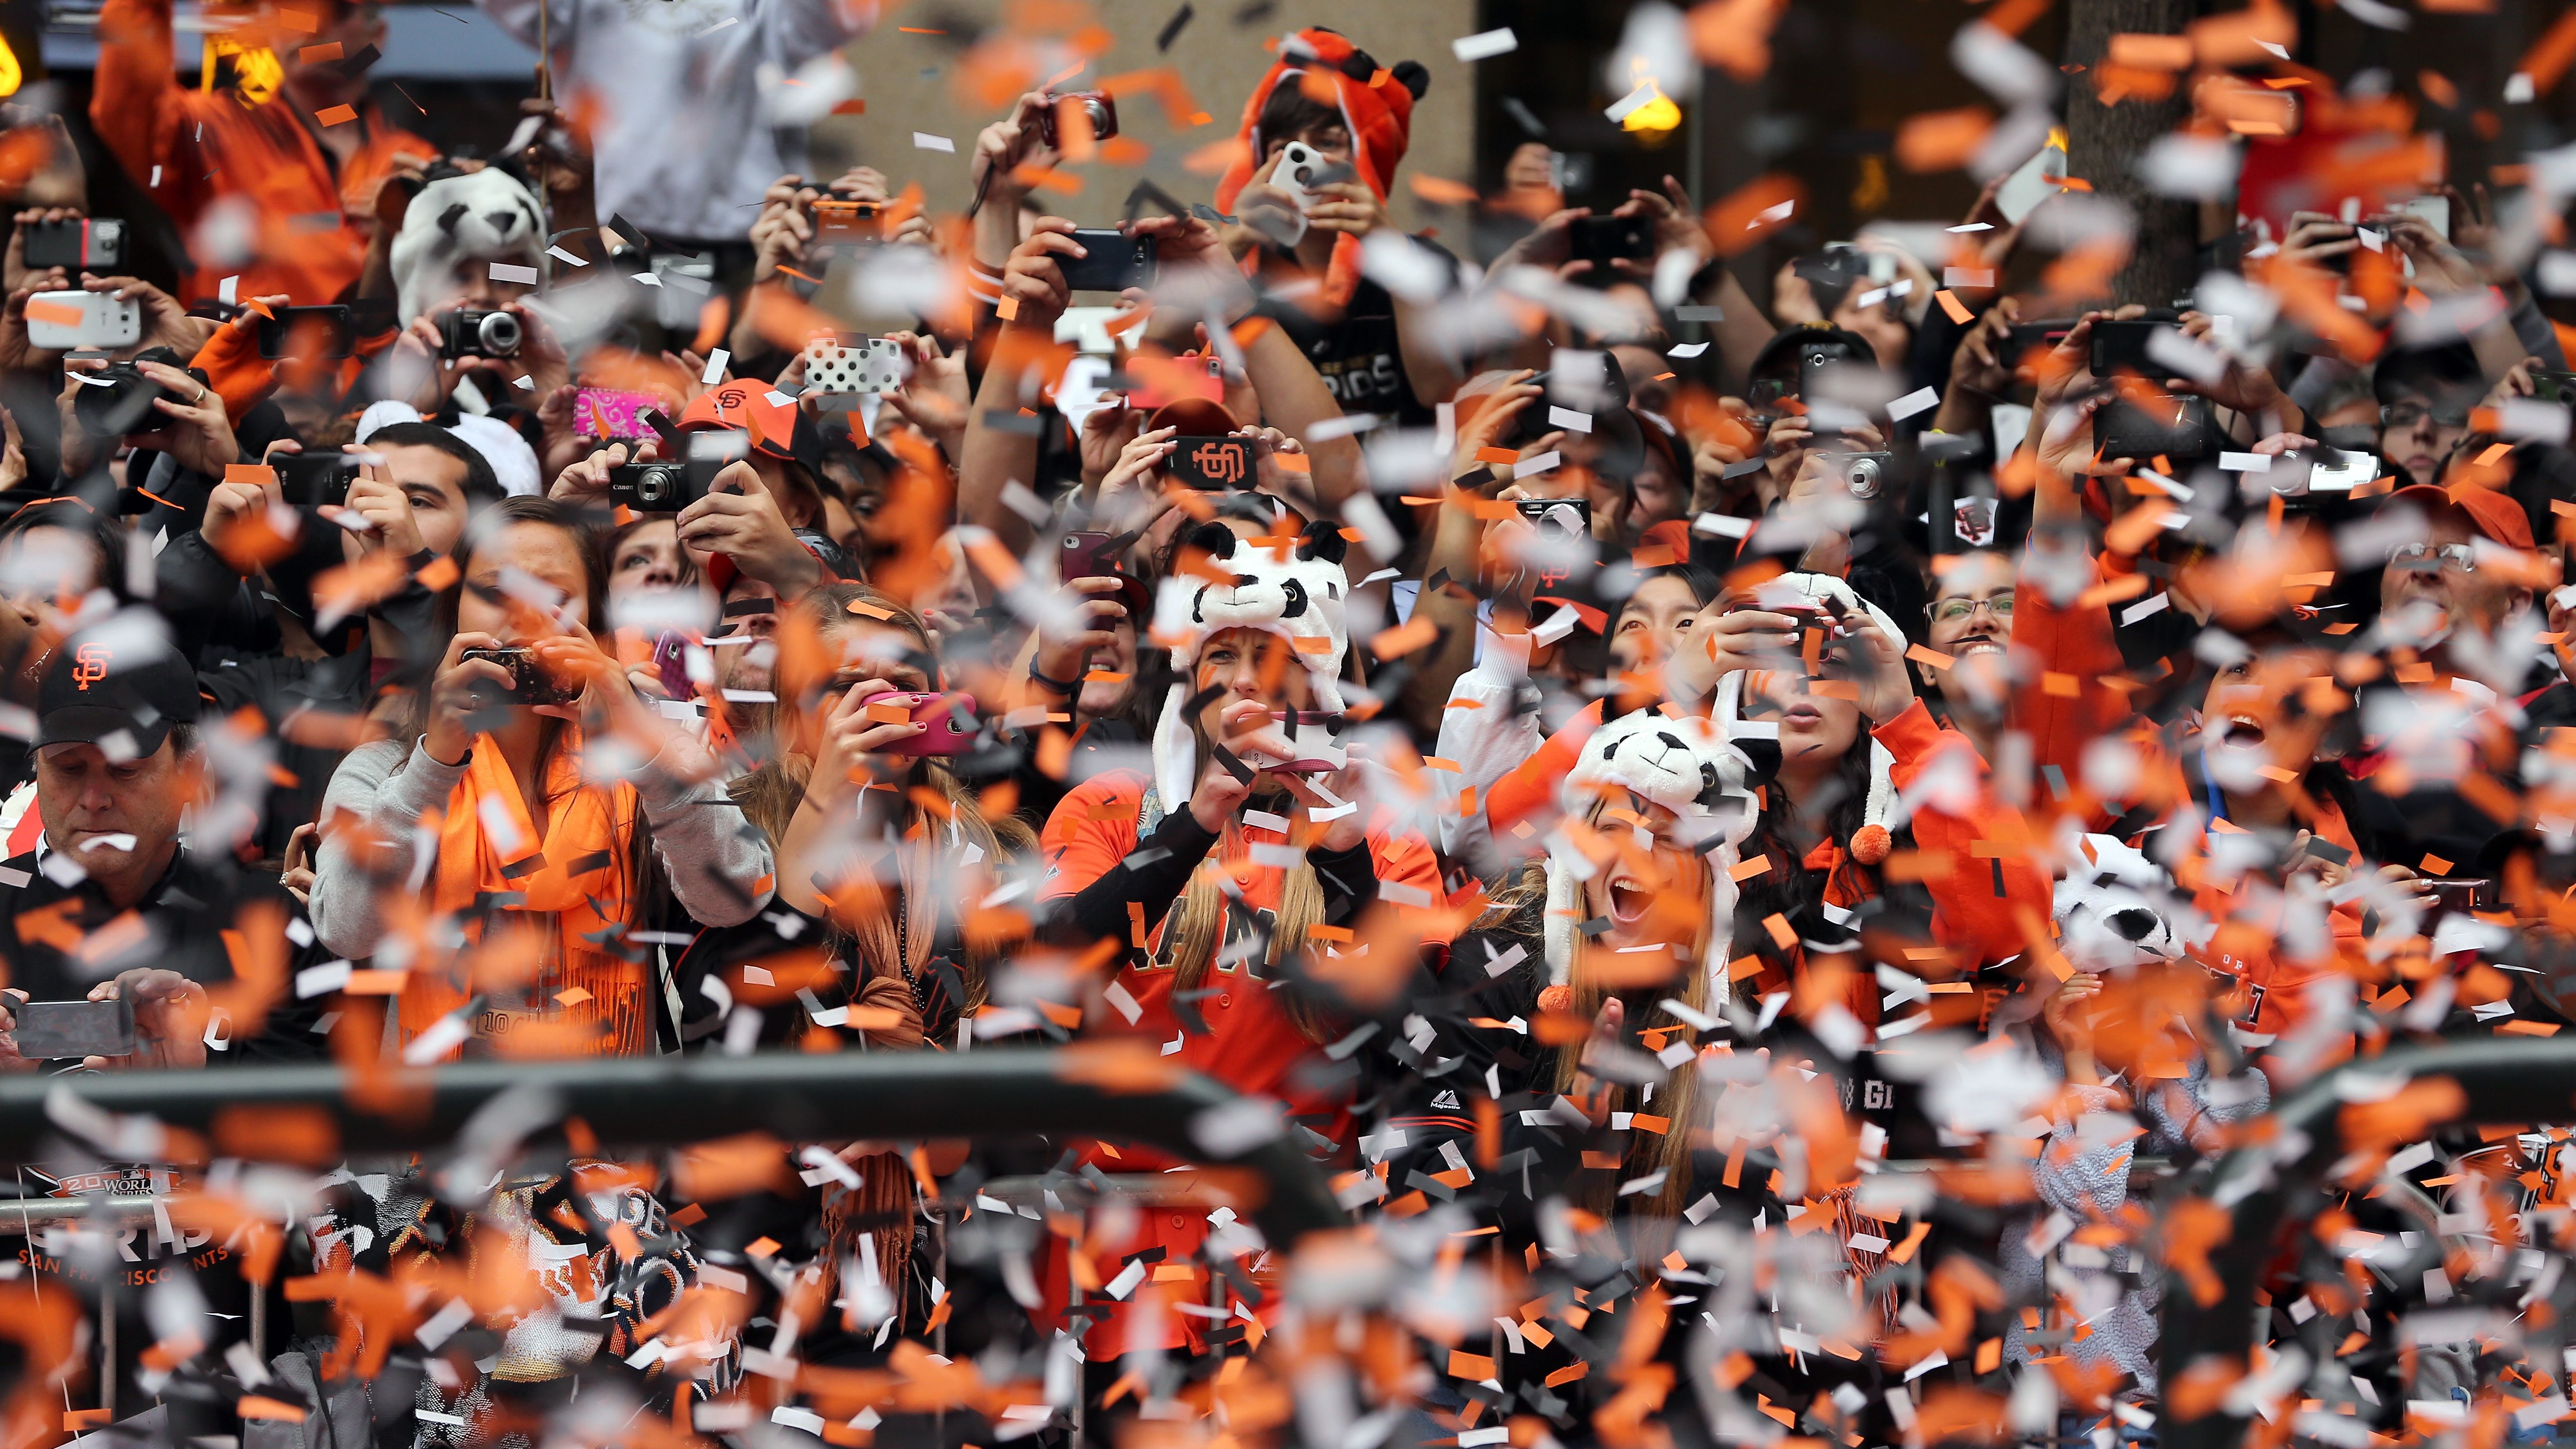 File:Buster Posey 2012 World Series Victory Parade.jpg - Wikipedia